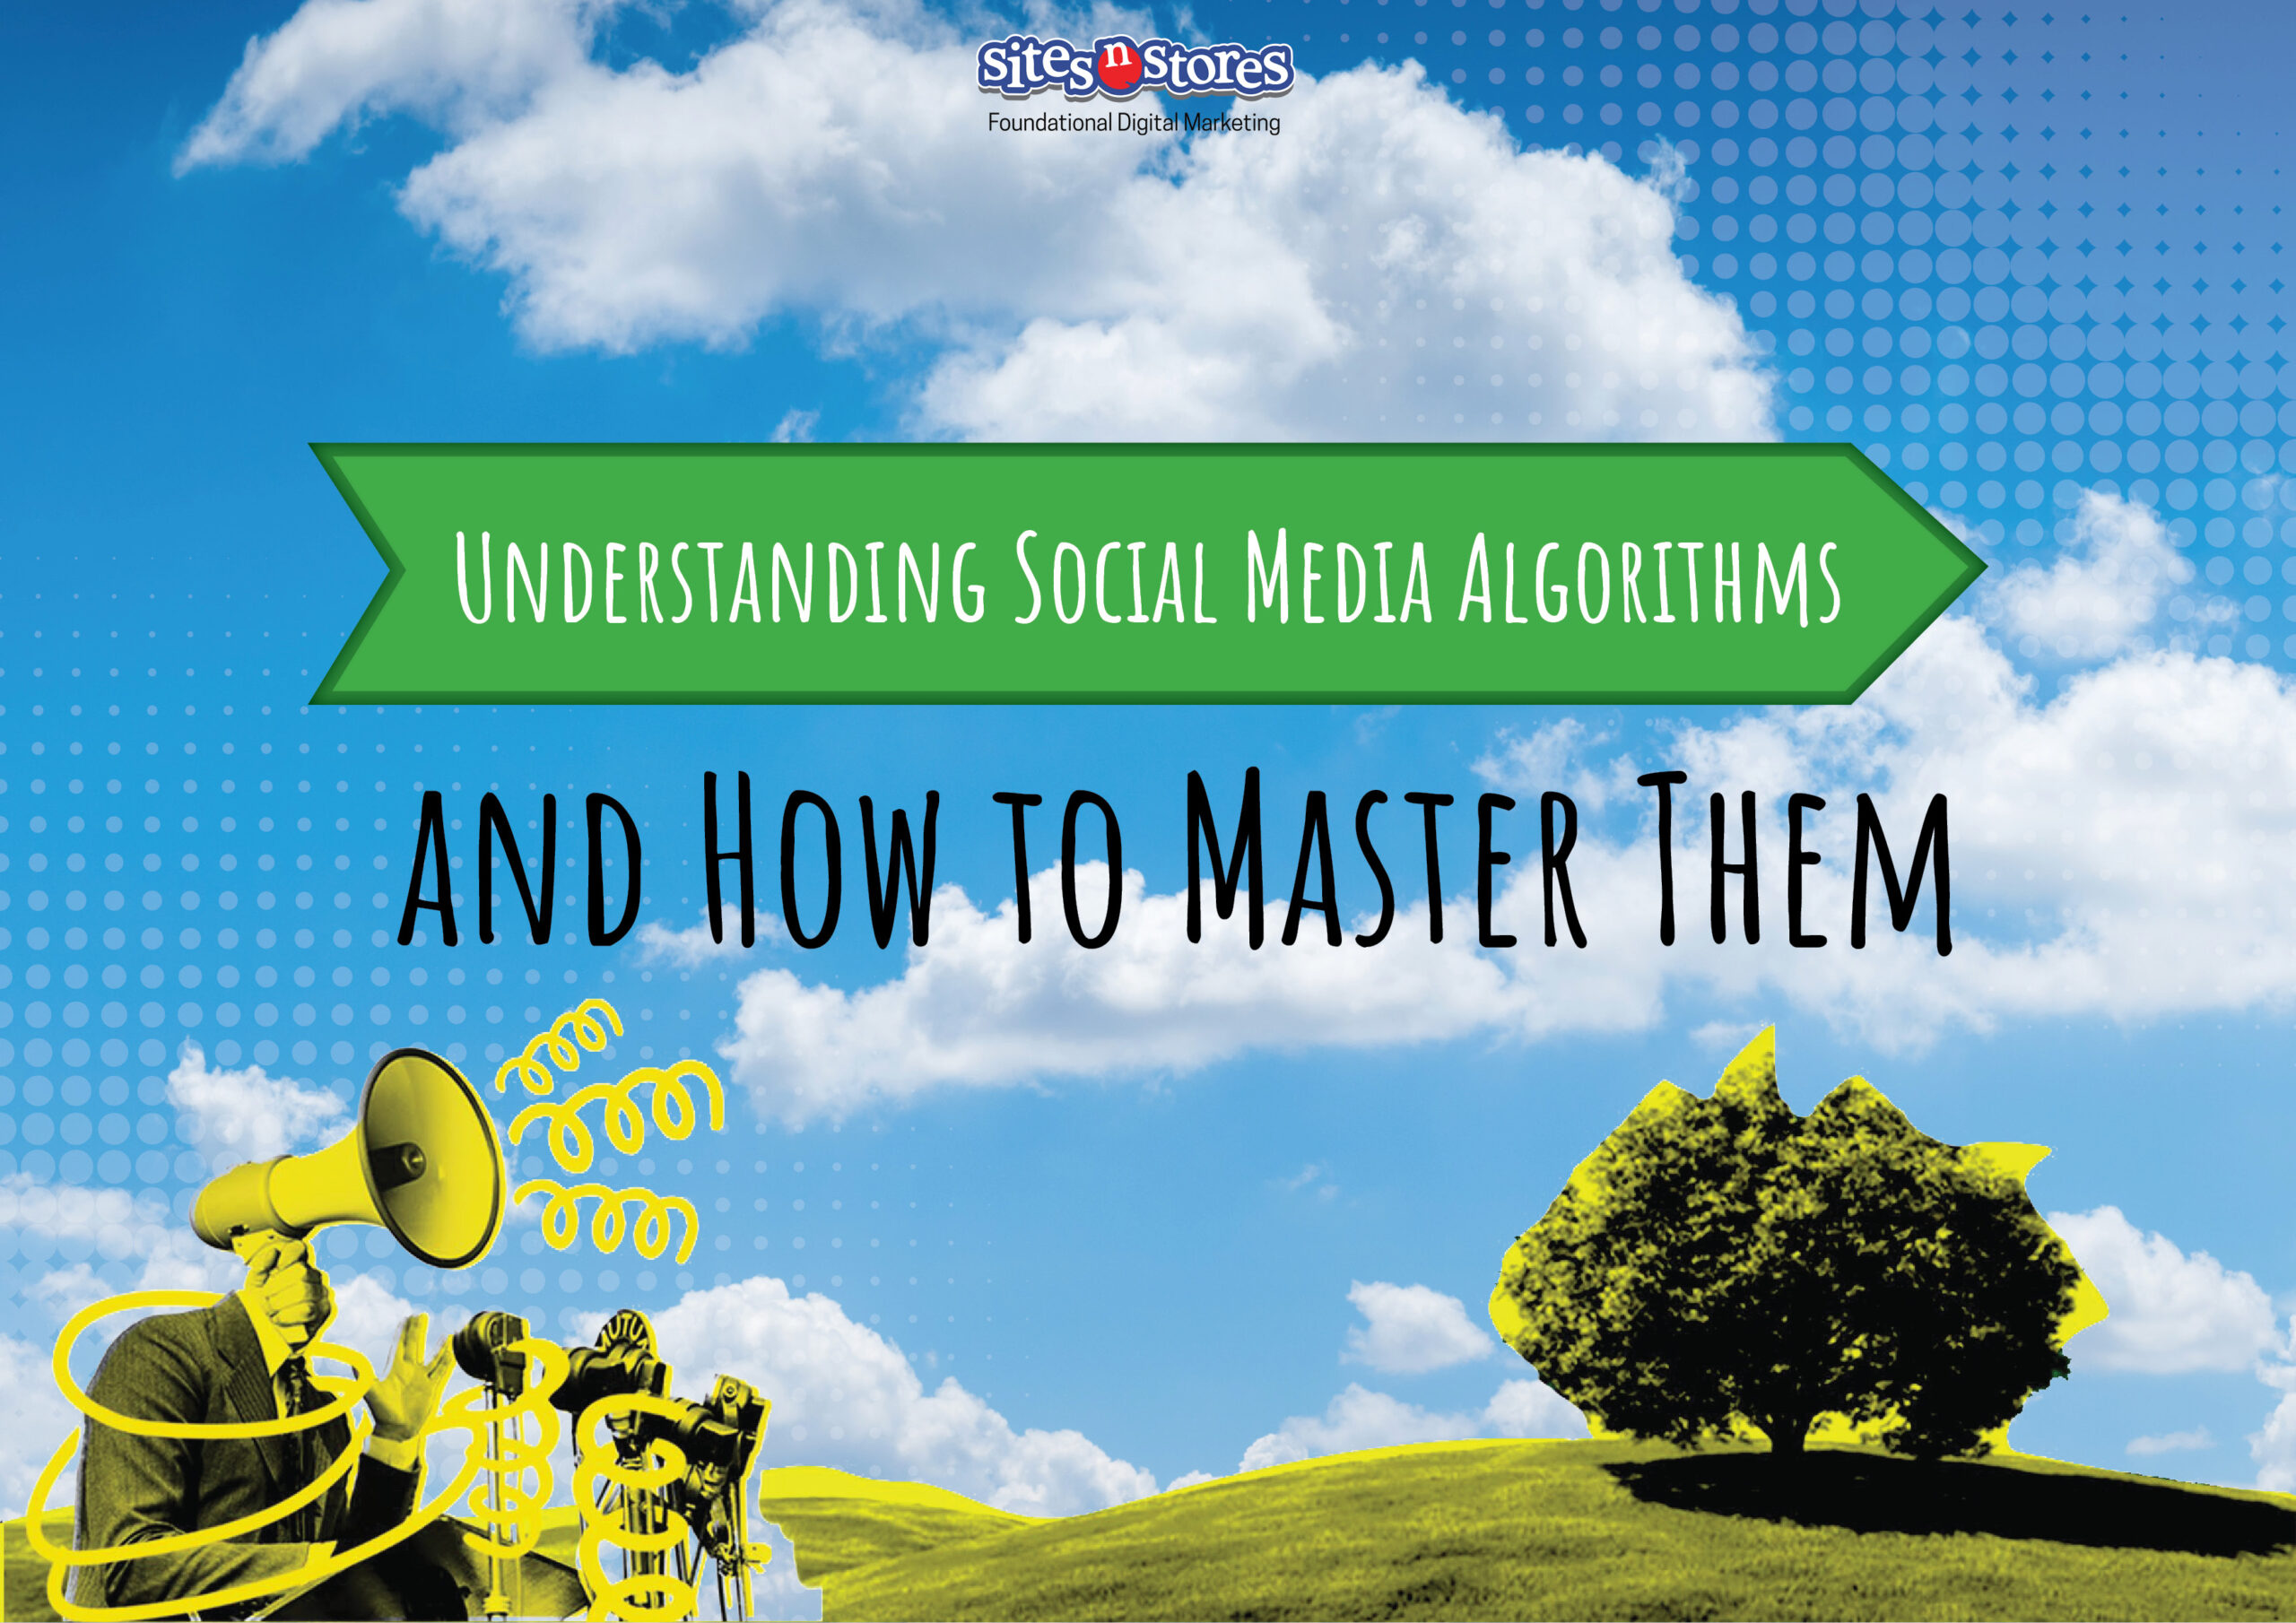 Understanding Social Media Algorithms and How to Master Them